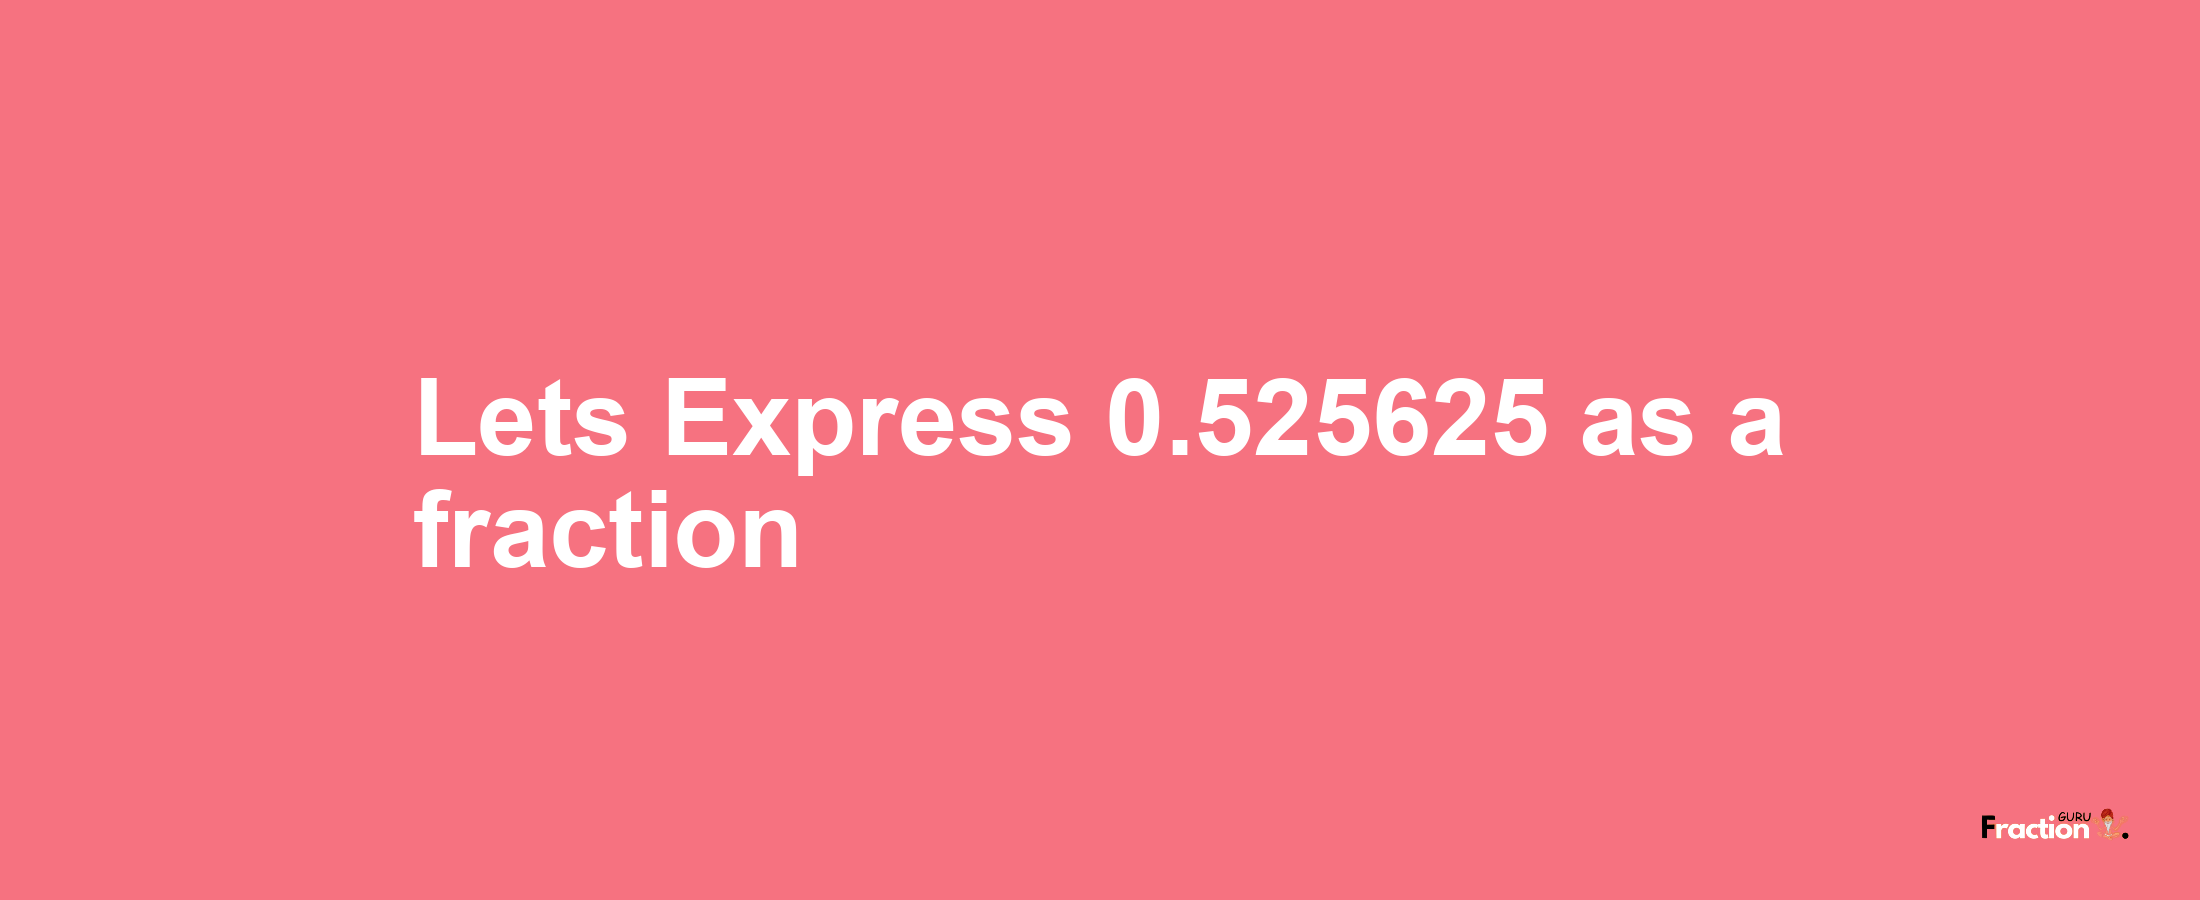 Lets Express 0.525625 as afraction